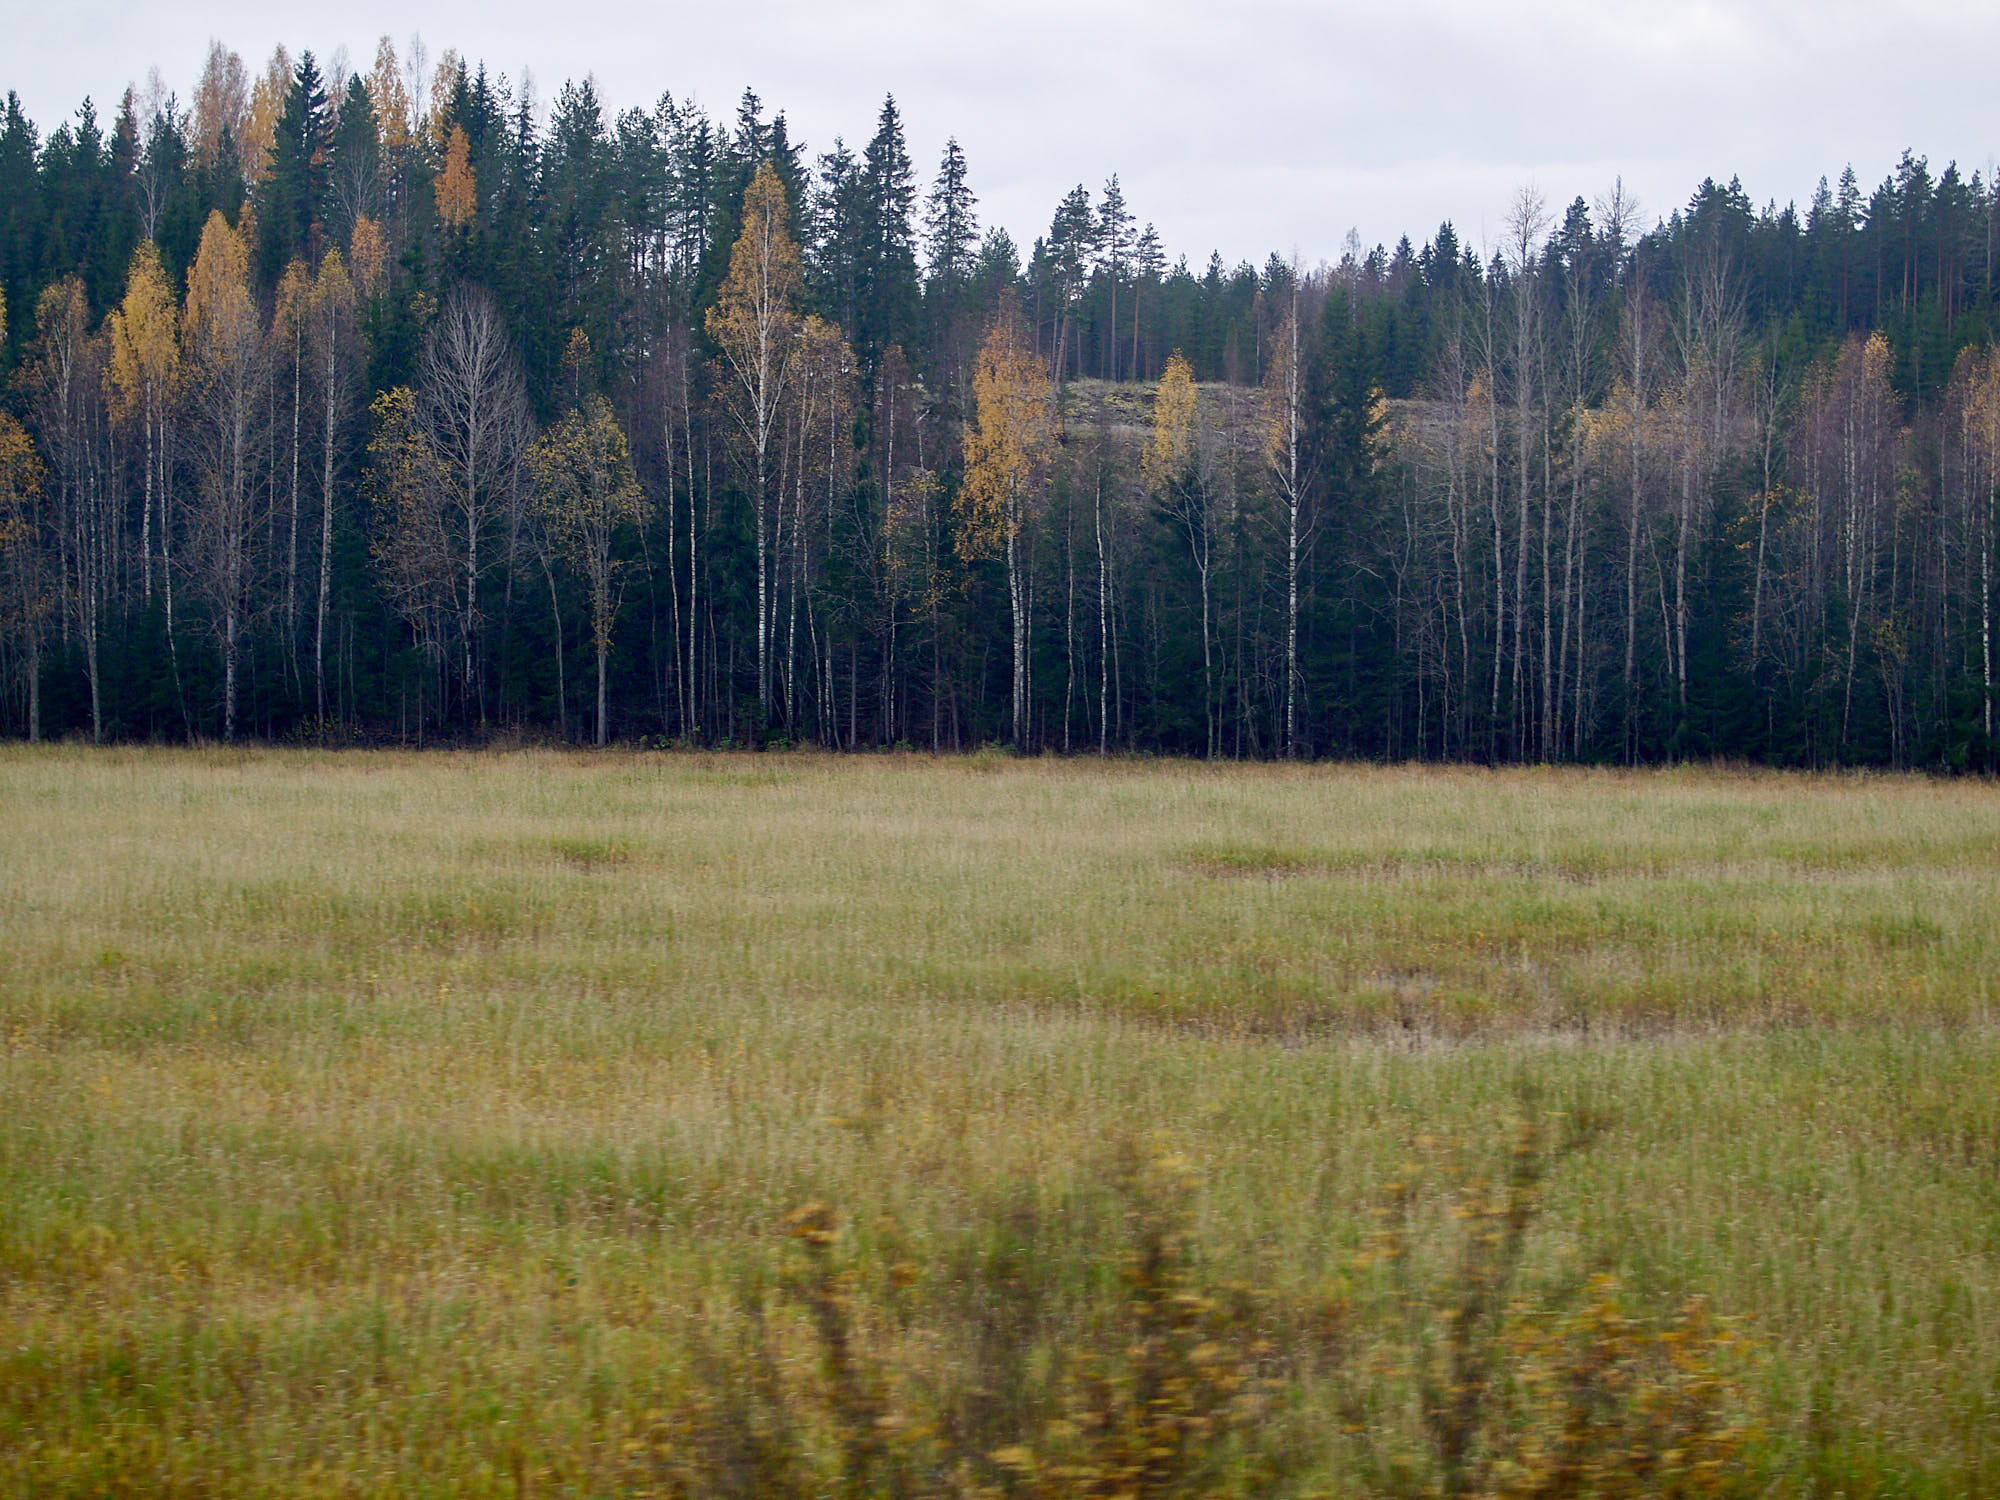 Photograph taken from a moving train showing branches and field blurred in the proximity.